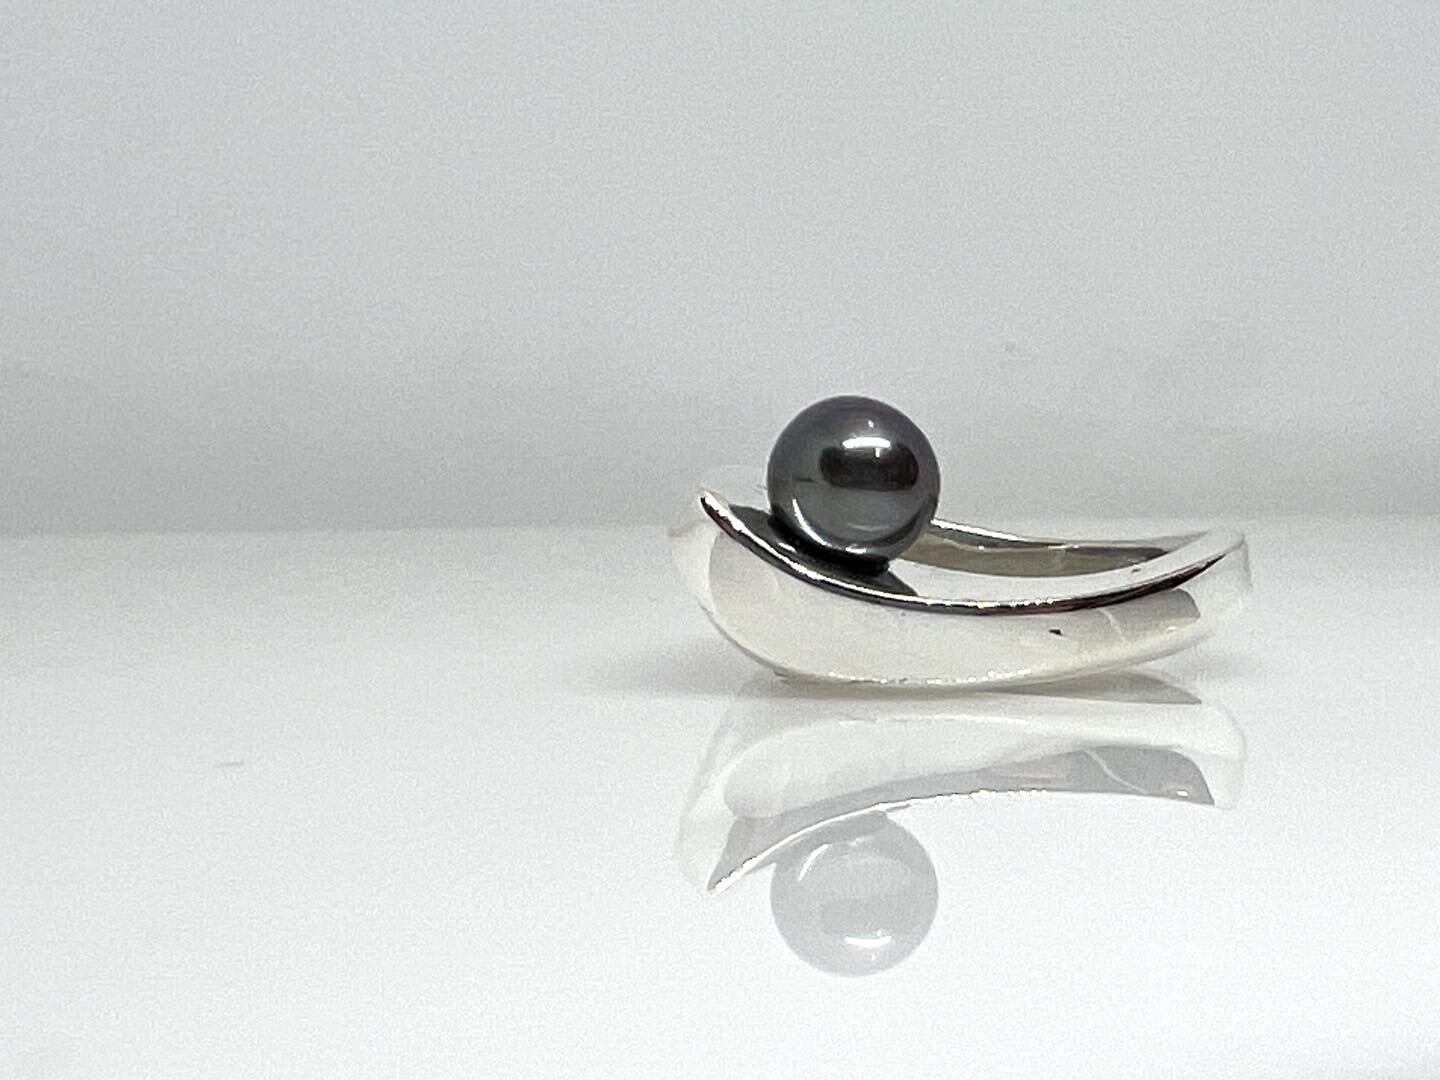 Sculptural wave ring in silver with black pearl.  Elegant and modern with a sleek high polish finish. 

#modernjewelrydesign #minimalist #minimalistdesign #sculpturaljewelry #sculpturaljewelrydesign #quietluxury #ContemporaryDesign #giftideas #blackp